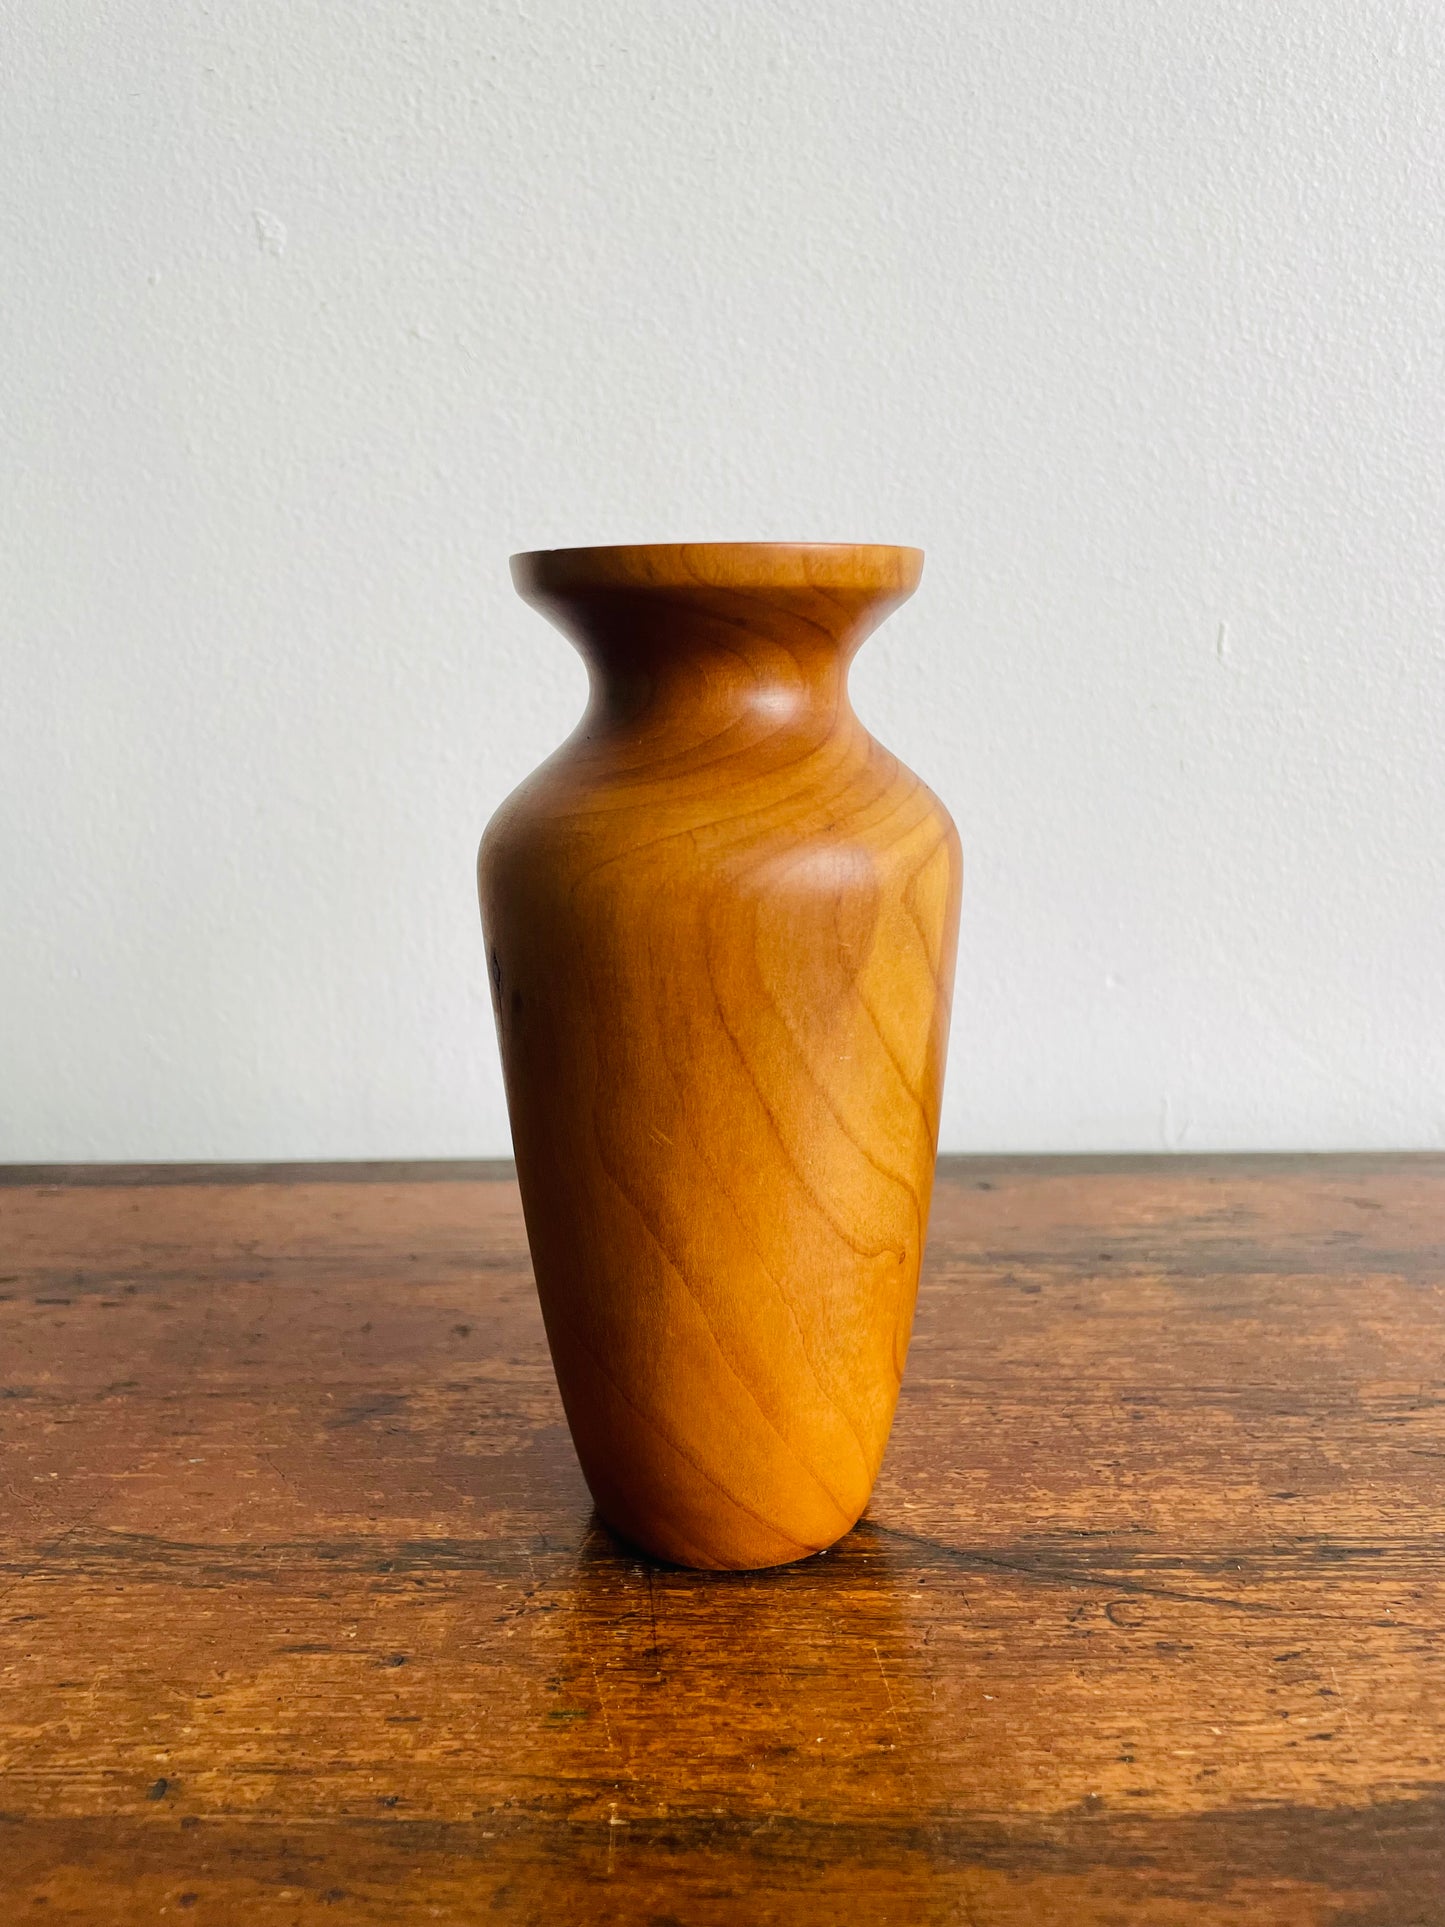 Smooth Teak Wood Bud Vase with Glass Vial Insert Inside for Watering Flowers